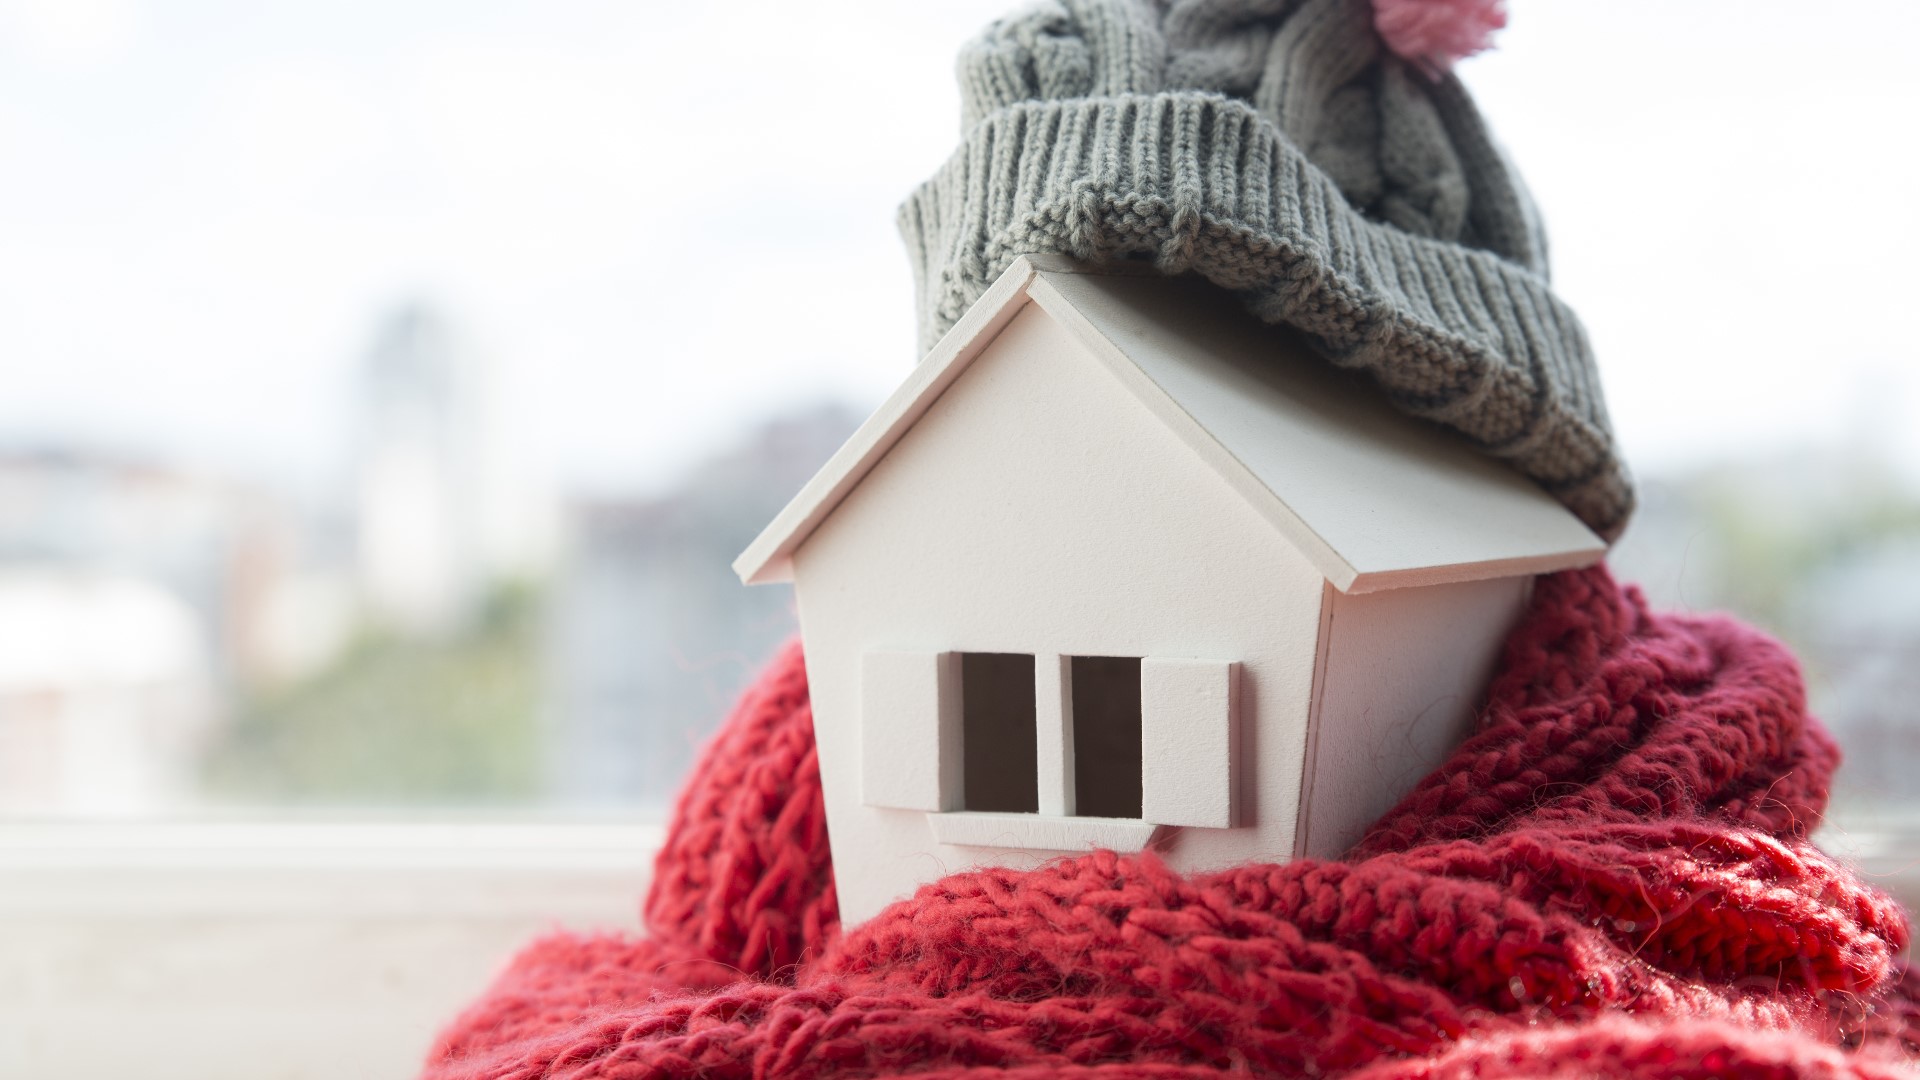 Does this weekend's weather have you concerned about how much it'll cost to heat your home? There are affordable fixes you can do now to help.